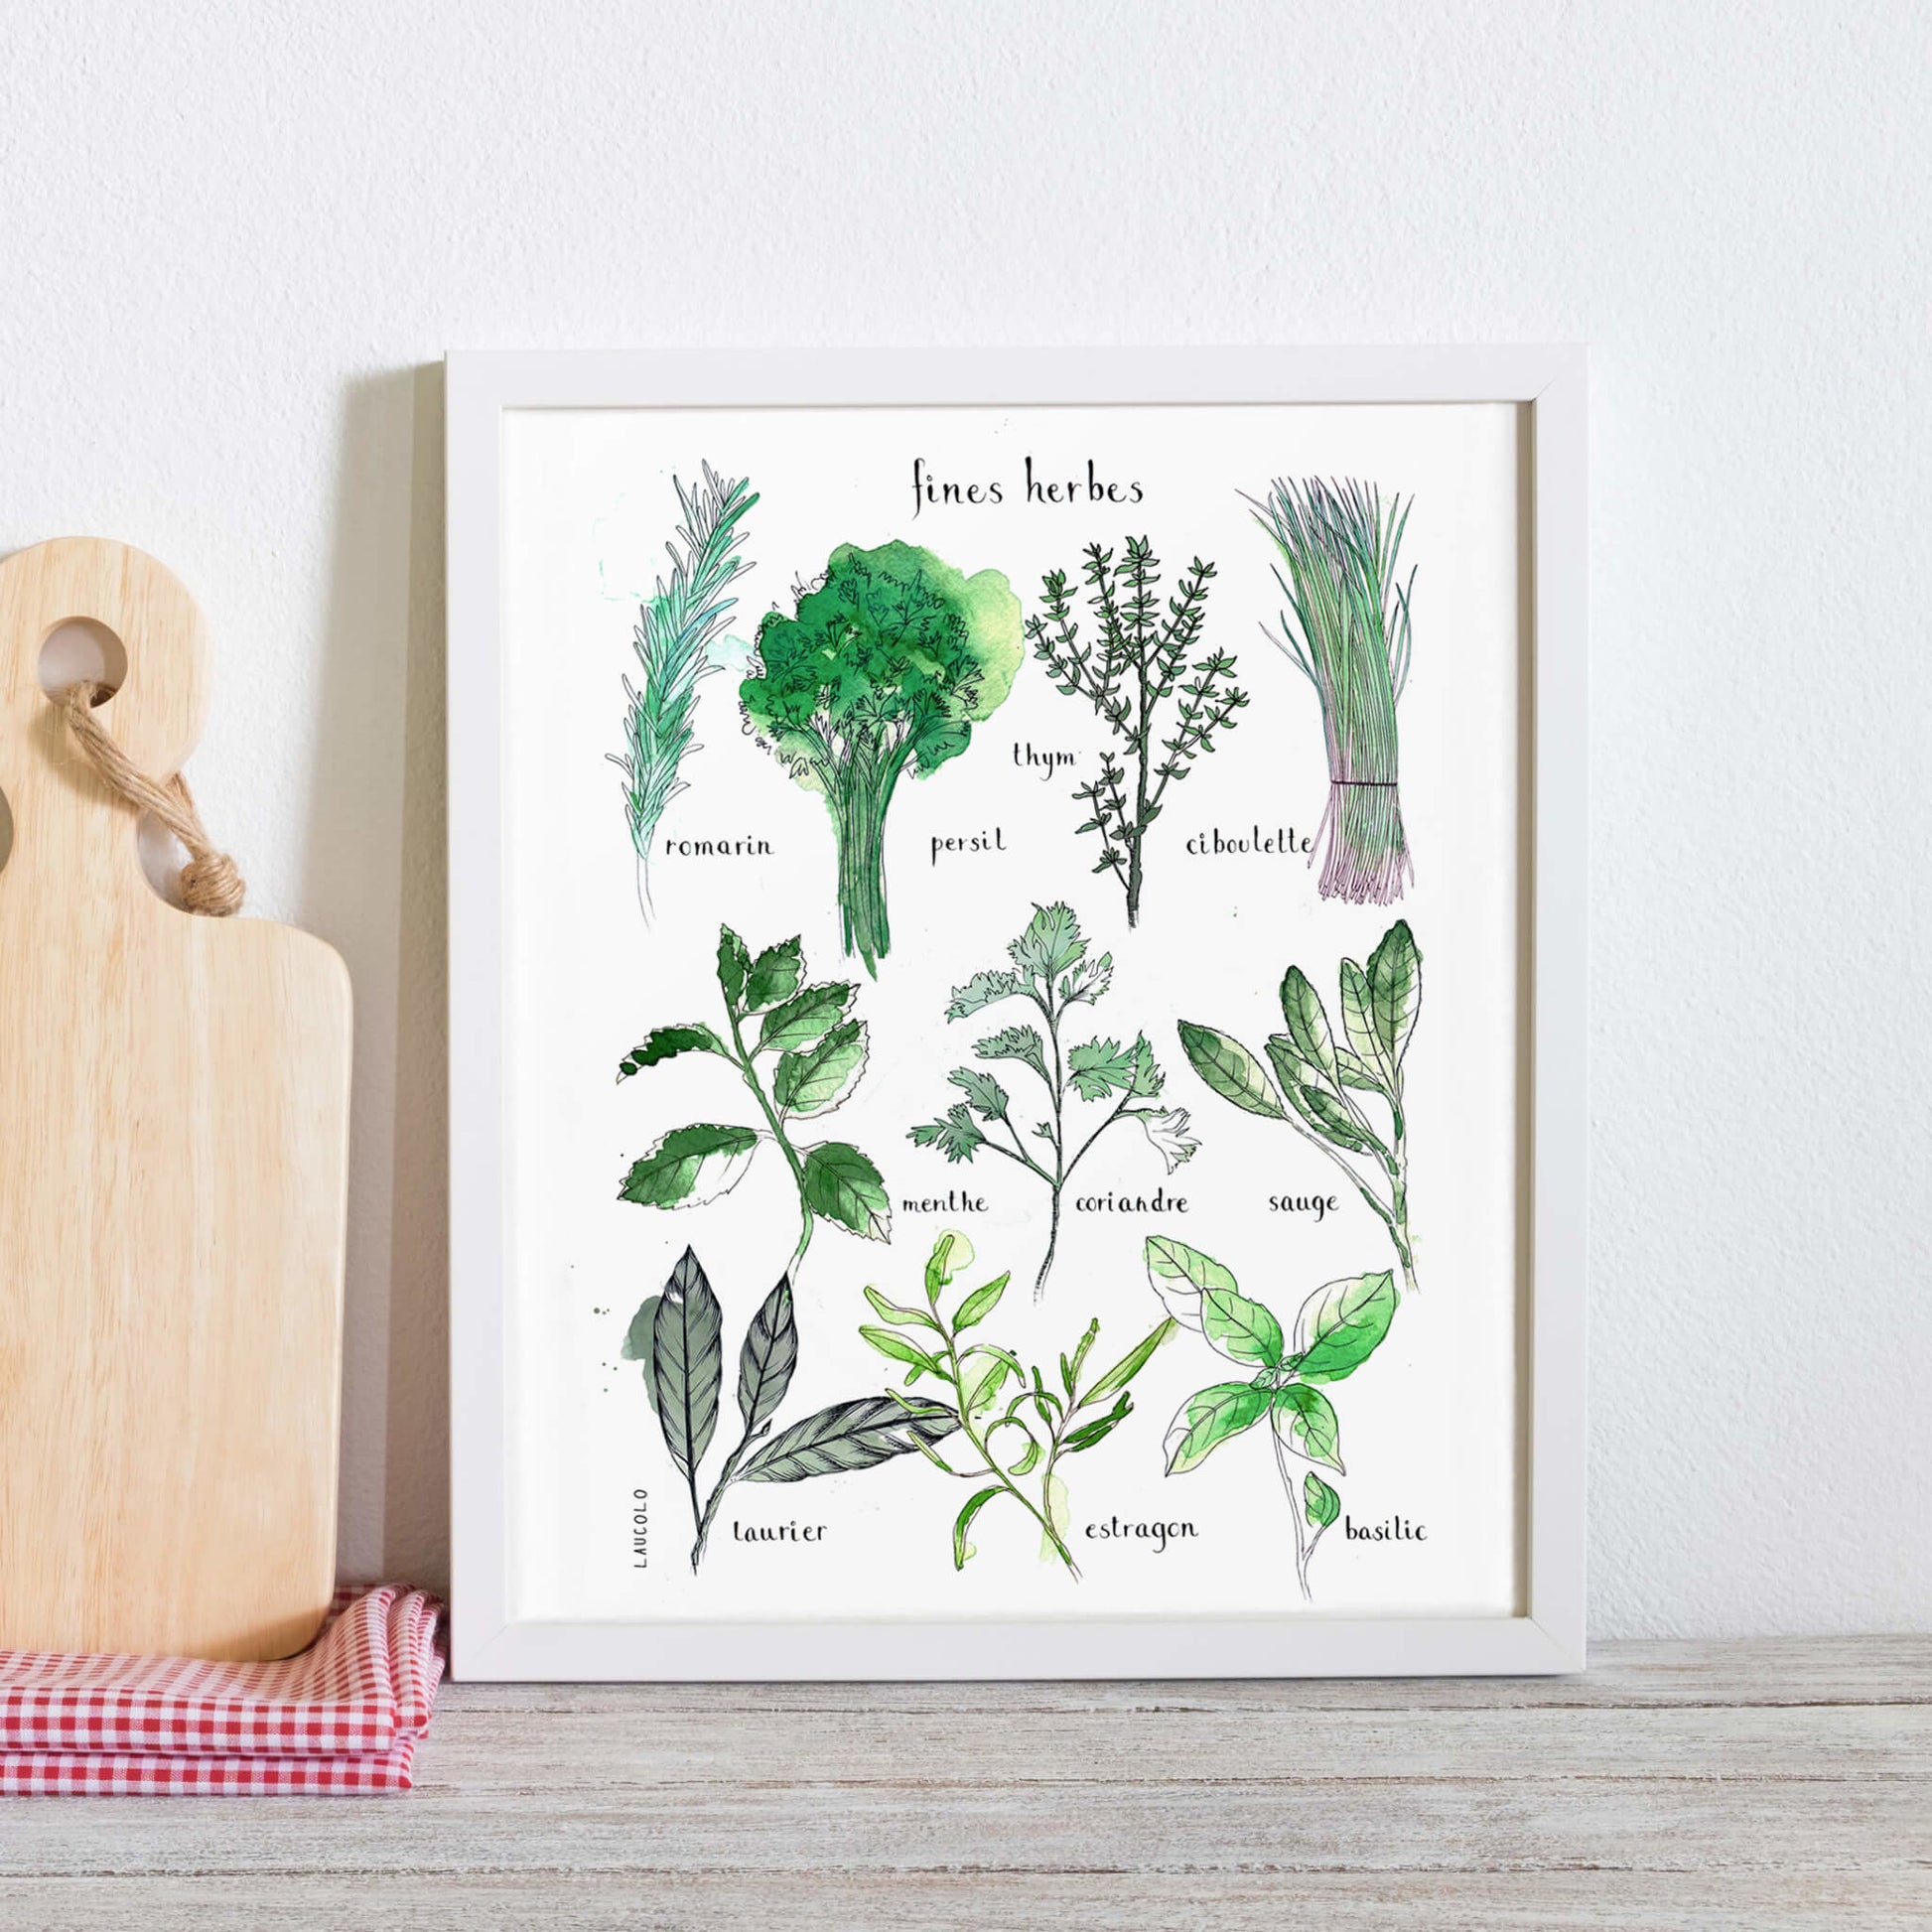 Fine herbs illustration poster leaning against wall in white frame next charcuterie board